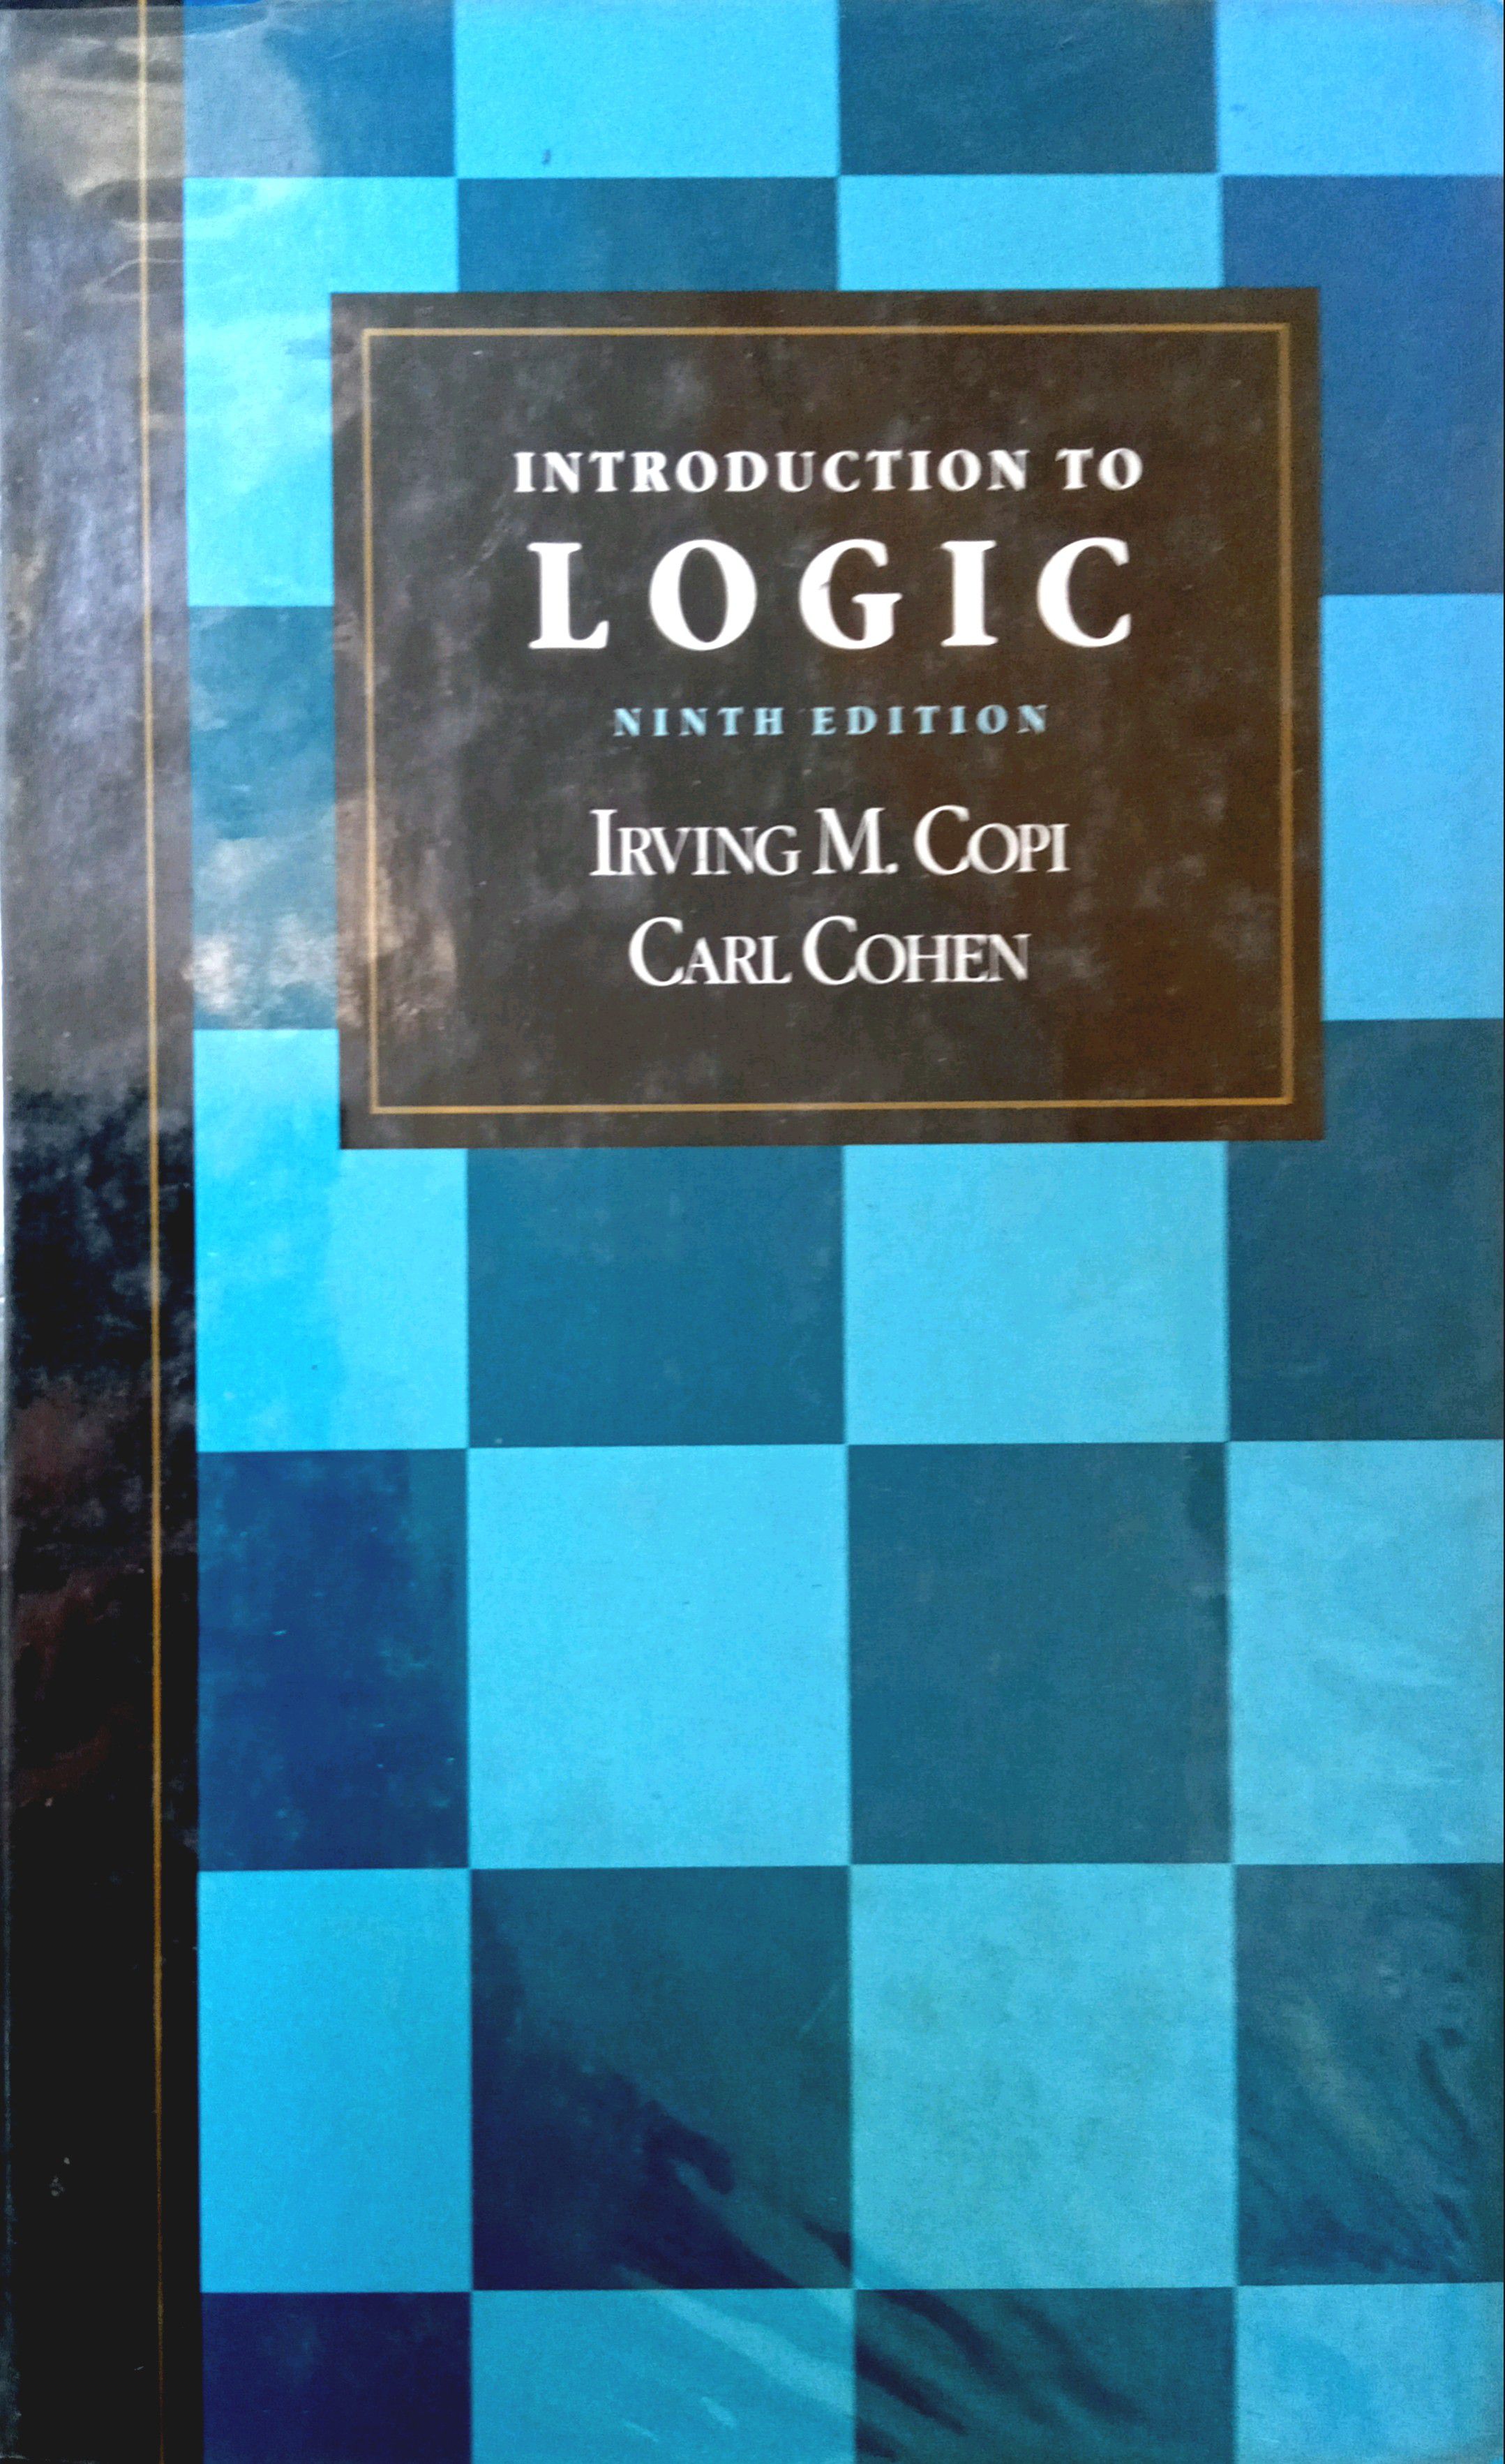 INTRODUCTION TO LOGIC